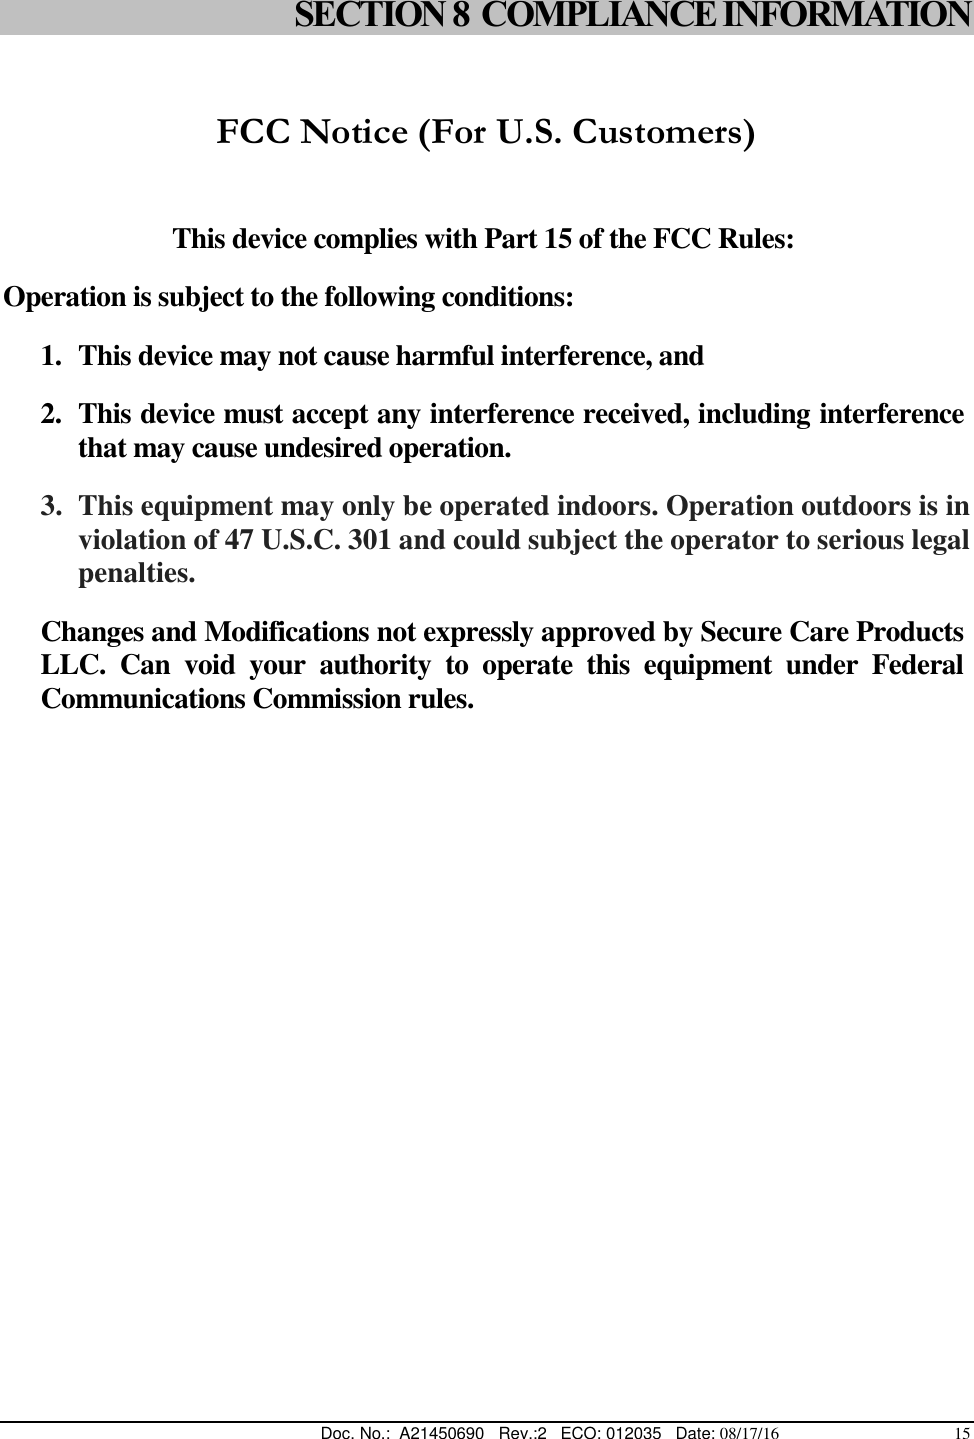  Doc. No.:  A21450690   Rev.:2   ECO: 012035   Date: 08/17/16                                          15 SECTION 8  COMPLIANCE INFORMATION  FCC Notice (For U.S. Customers)   This device complies with Part 15 of the FCC Rules: Operation is subject to the following conditions: 1. This device may not cause harmful interference, and 2. This device must accept any interference received, including interference that may cause undesired operation. 3. This equipment may only be operated indoors. Operation outdoors is in violation of 47 U.S.C. 301 and could subject the operator to serious legal penalties. Changes and Modifications not expressly approved by Secure Care Products LLC.  Can  void  your  authority  to  operate  this  equipment  under  Federal Communications Commission rules.  